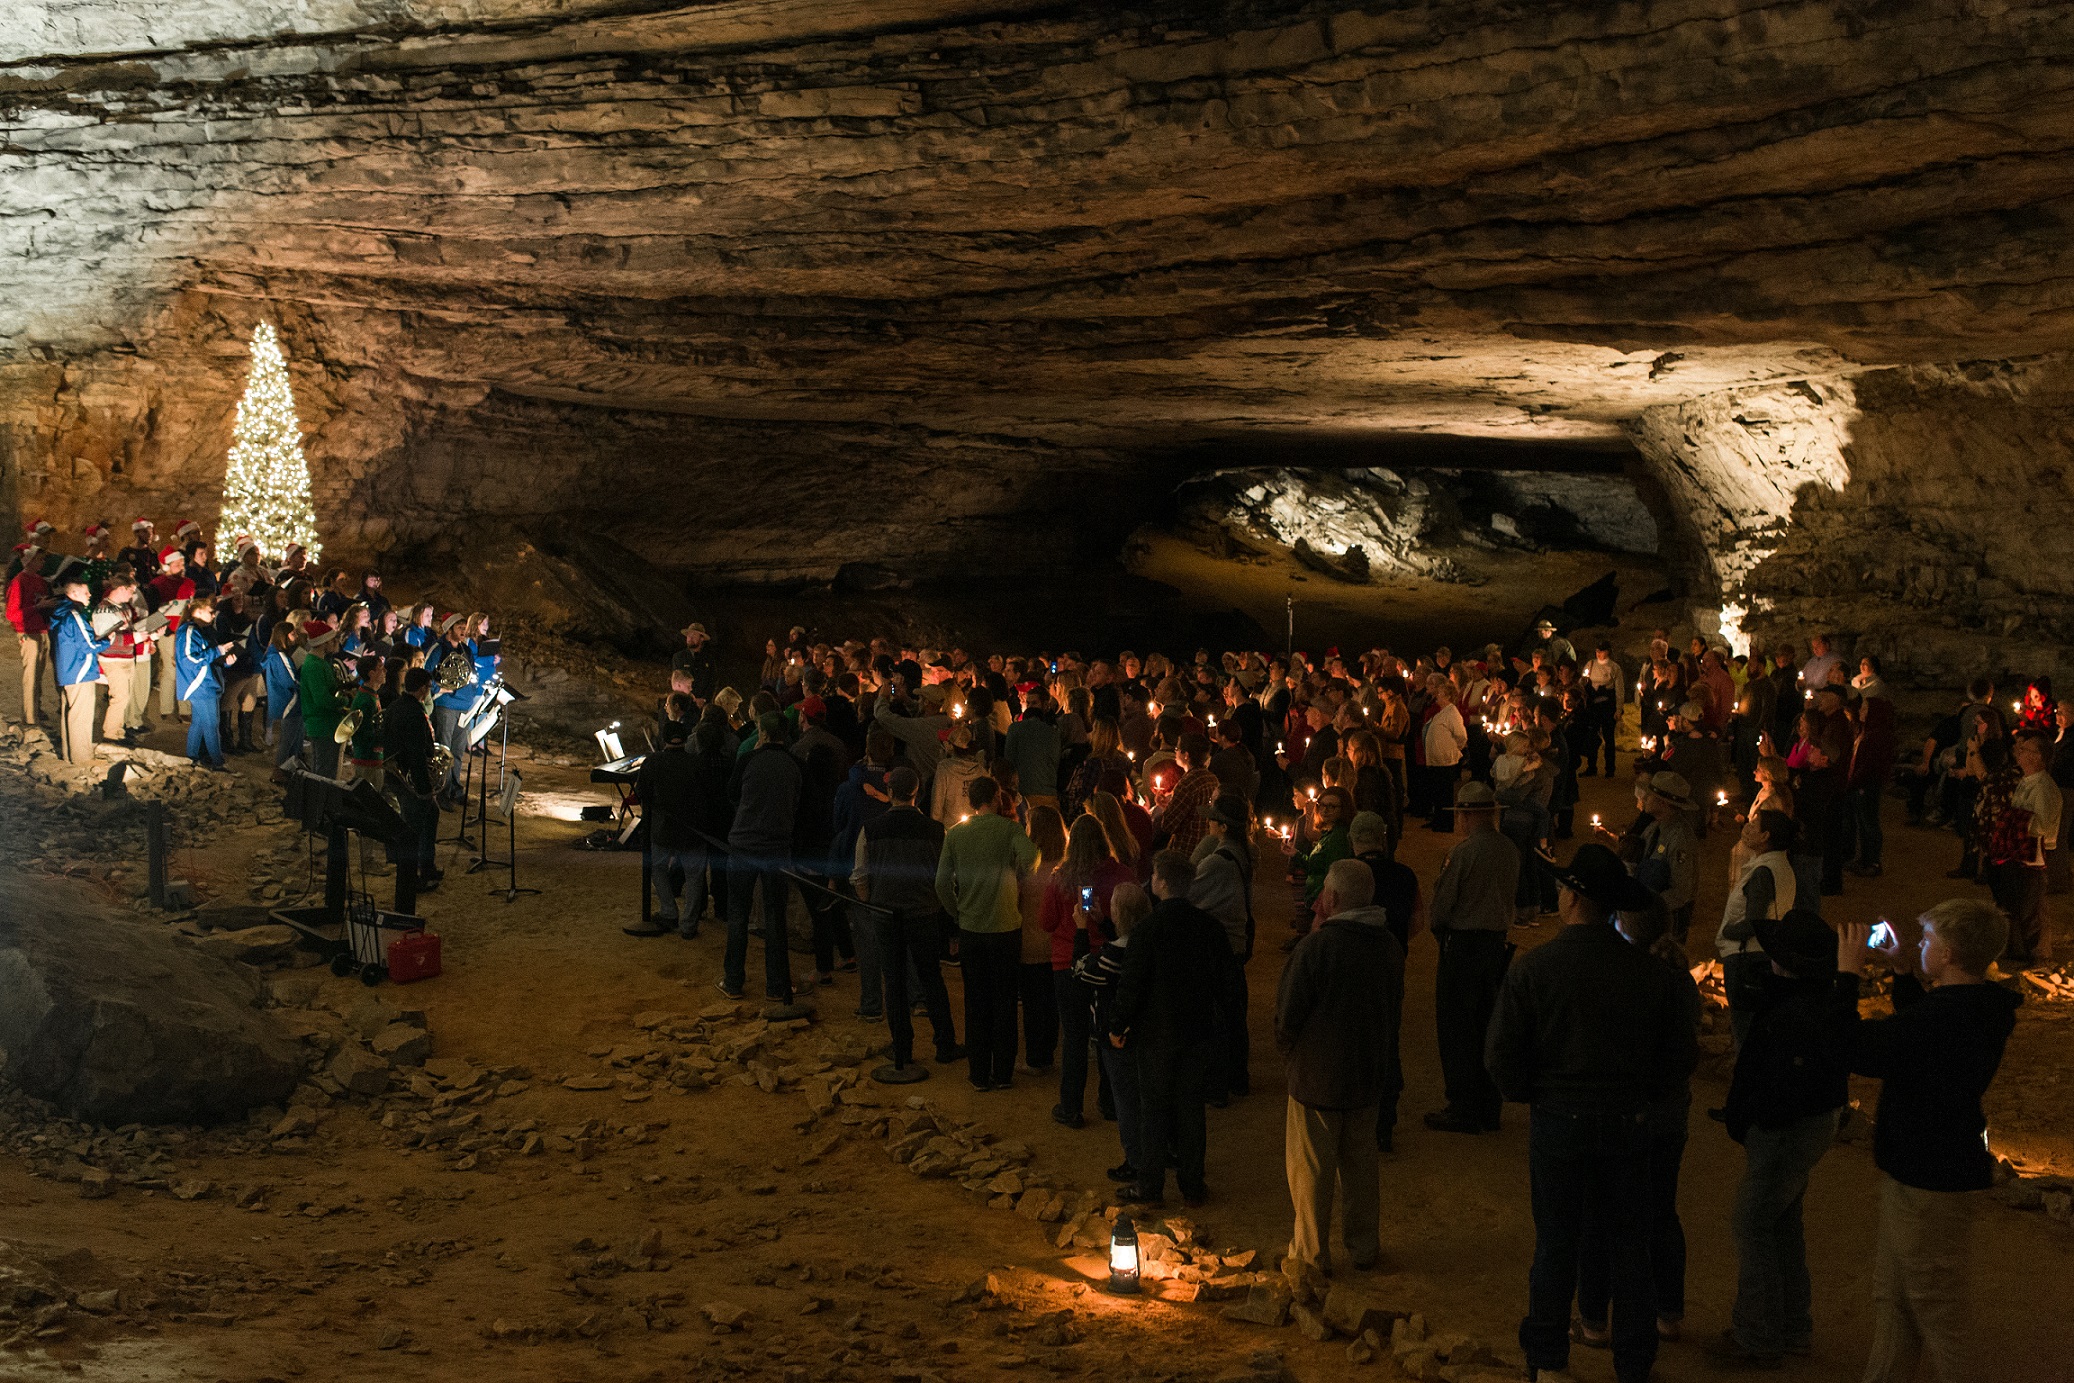 A large group of people stand as a group to watch singers on a hillside in a dimly lit cave.